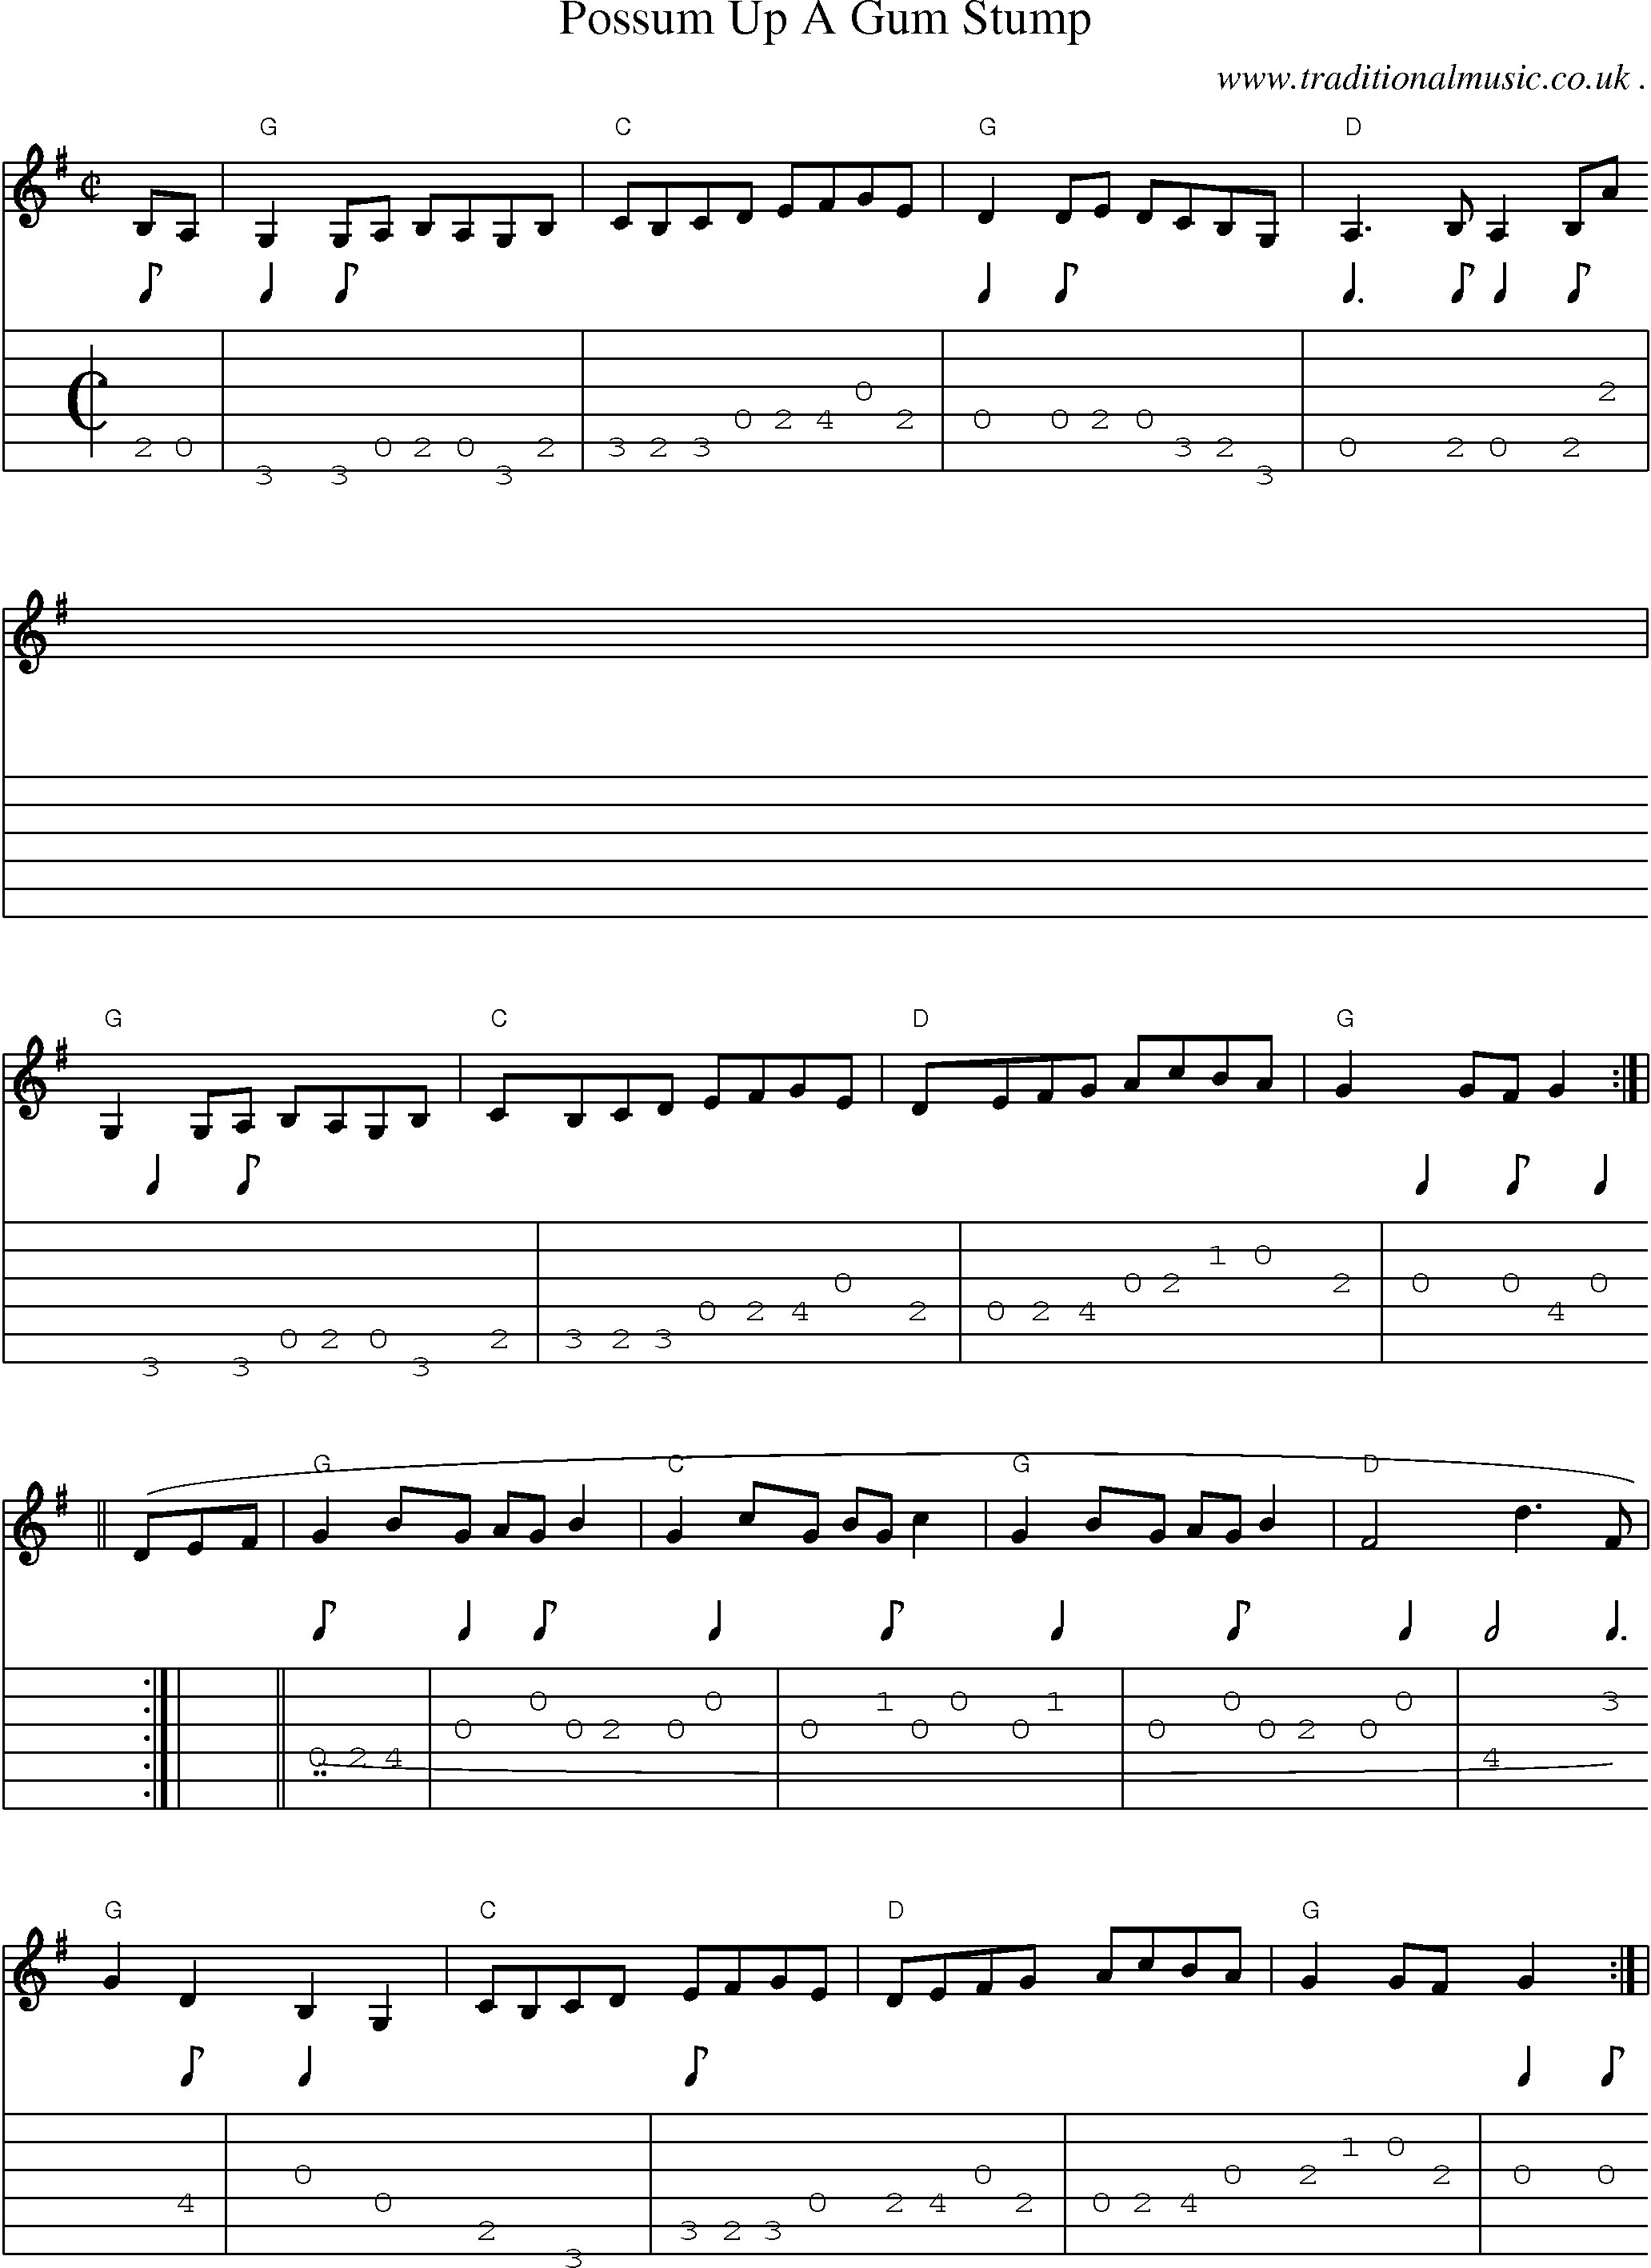 Sheet-music  score, Chords and Guitar Tabs for Possum Up A Gum Stump